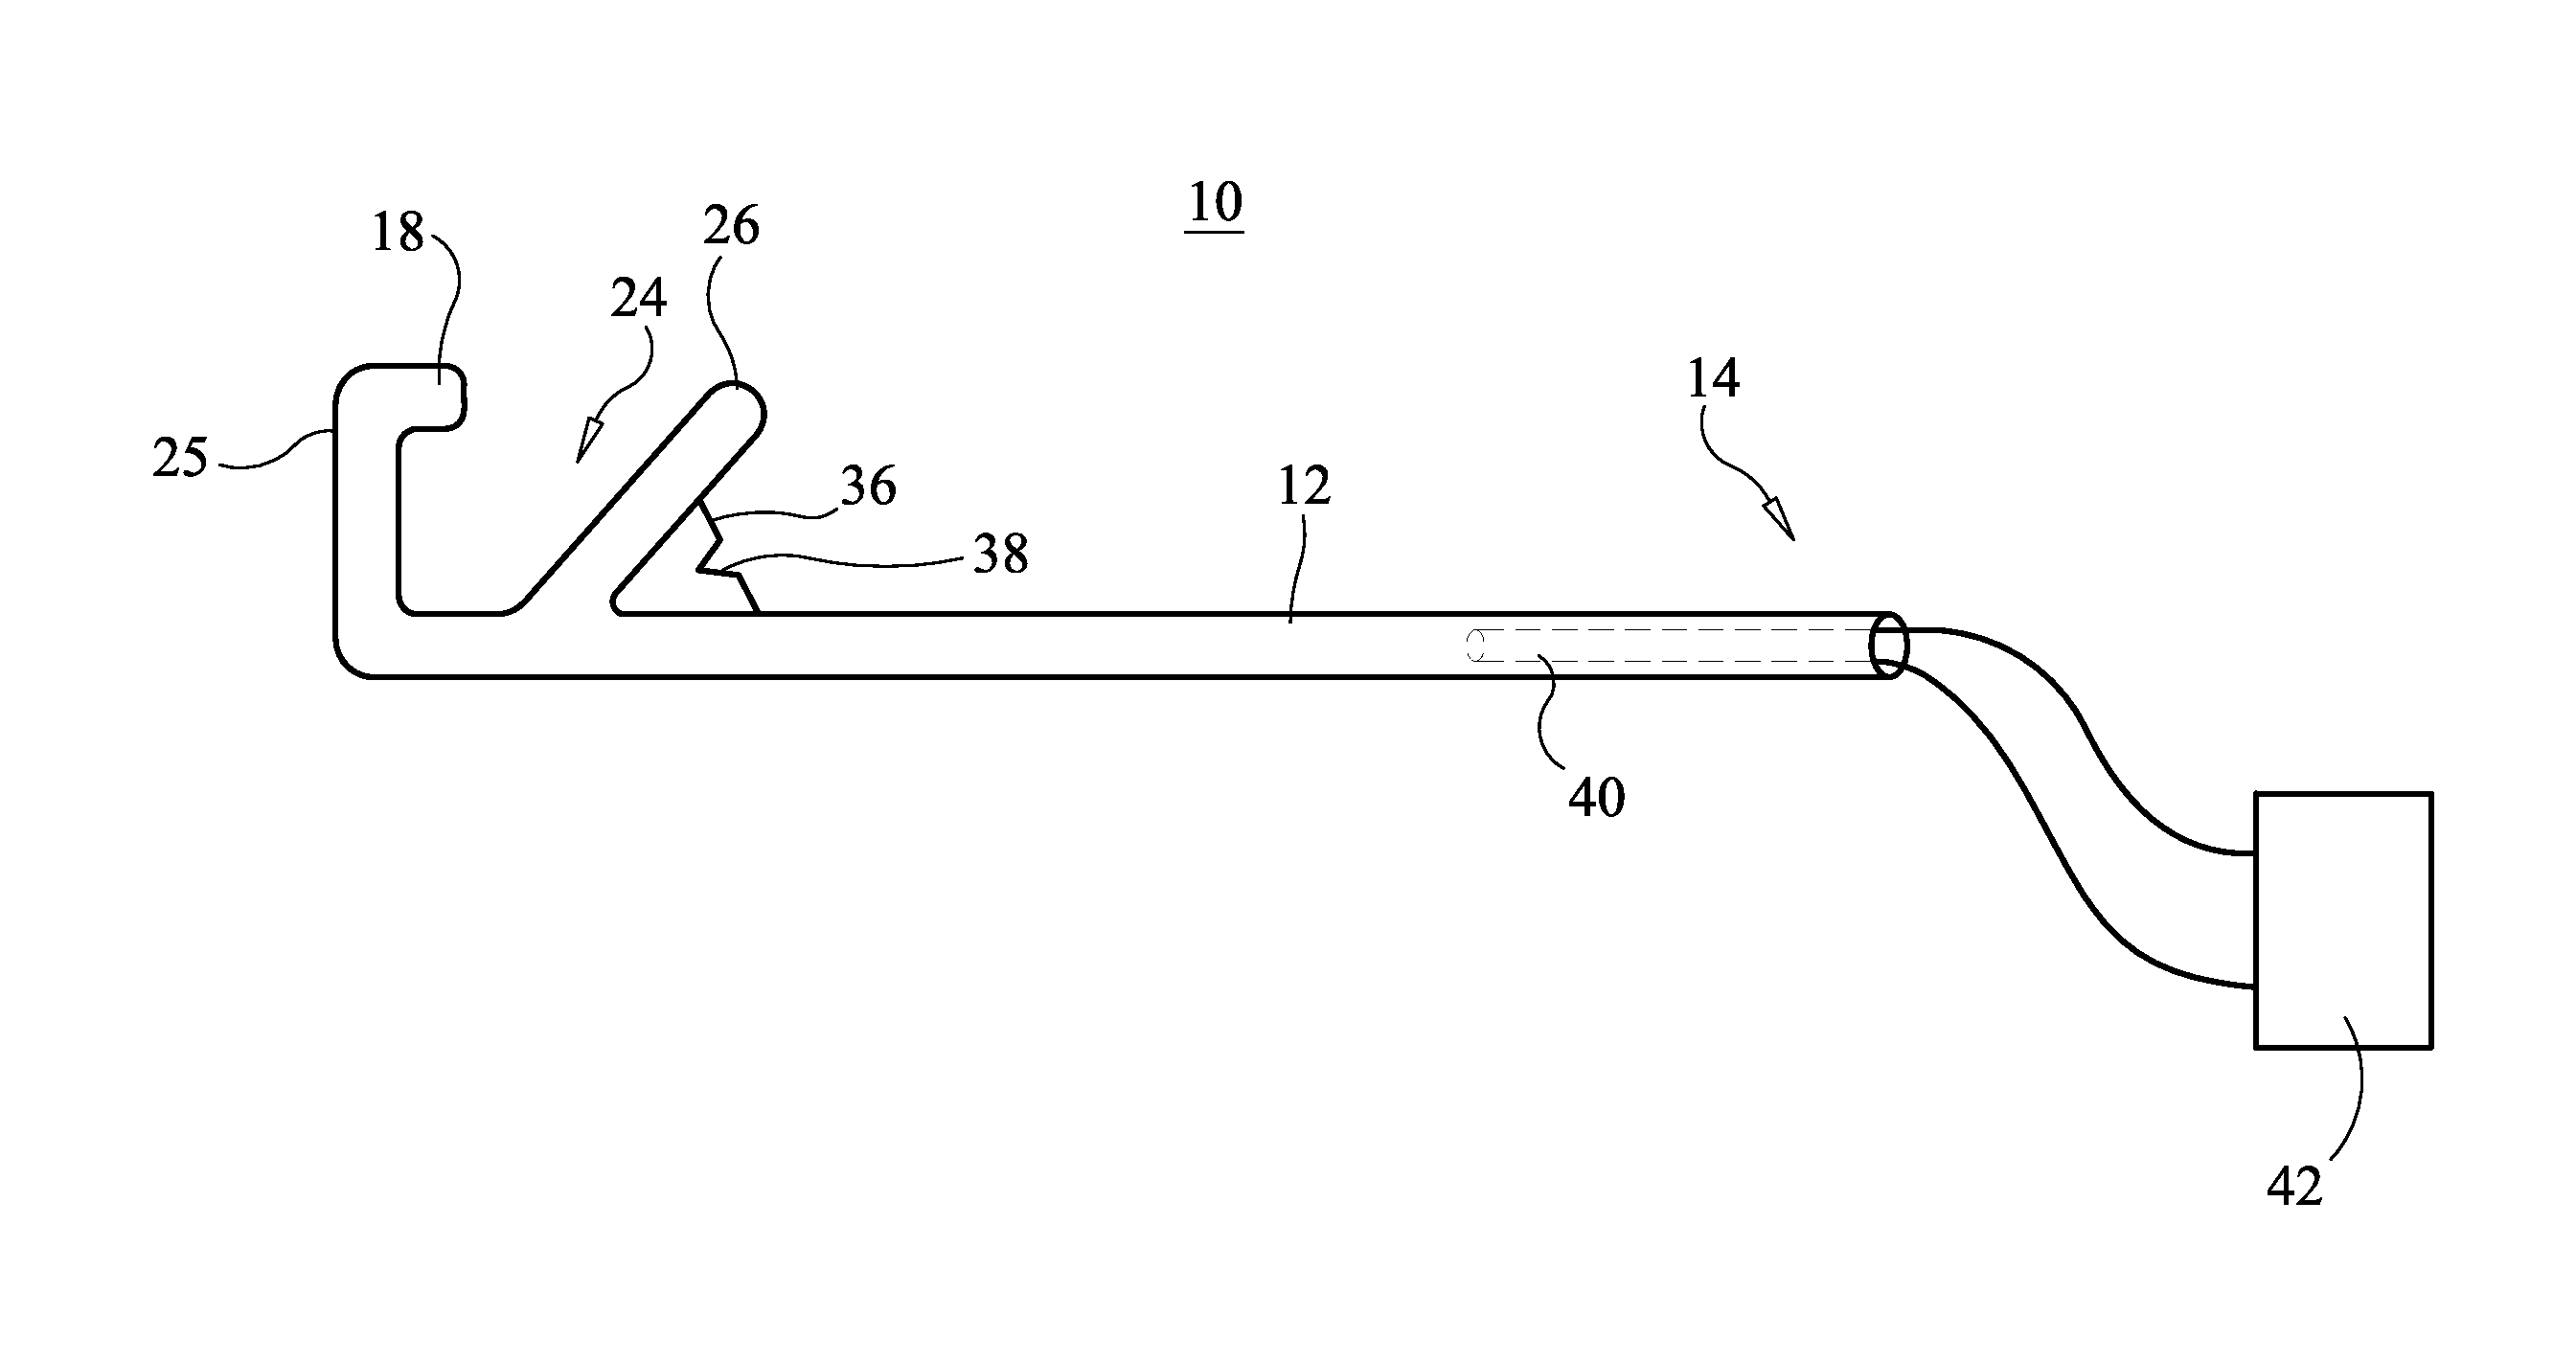 Surgical cutting device